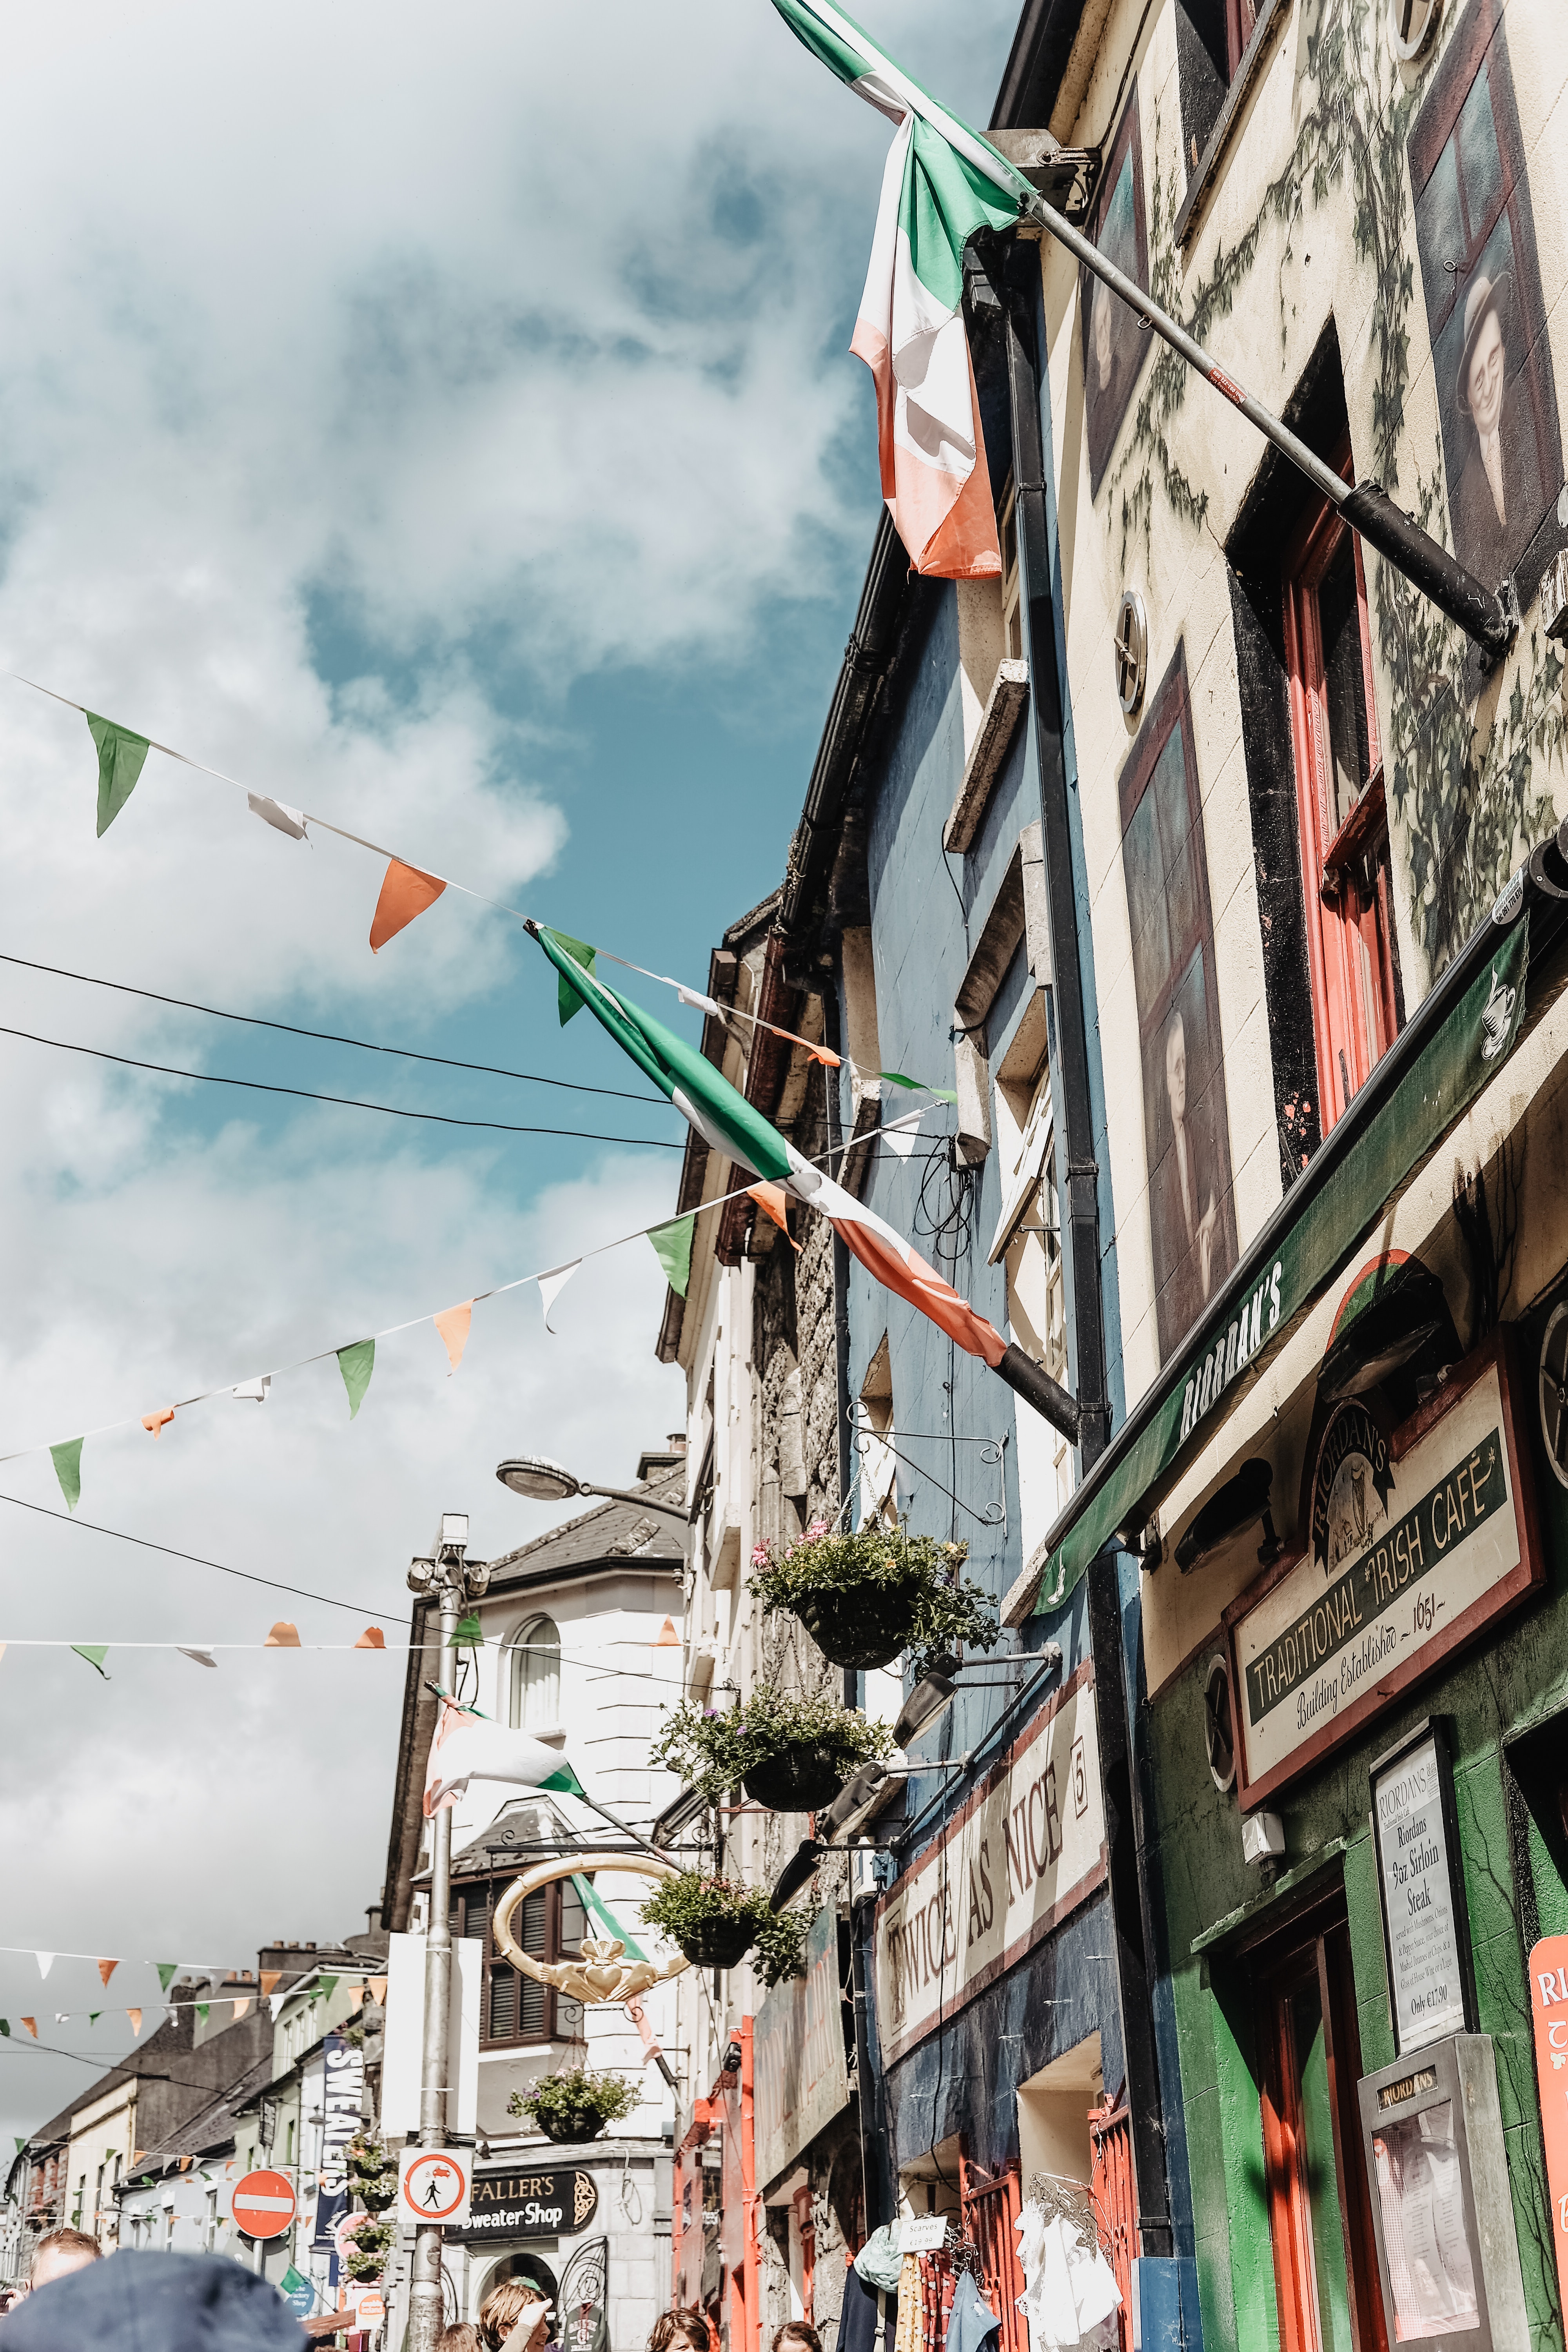 A row of historic buildings with Irish flags hung between them.